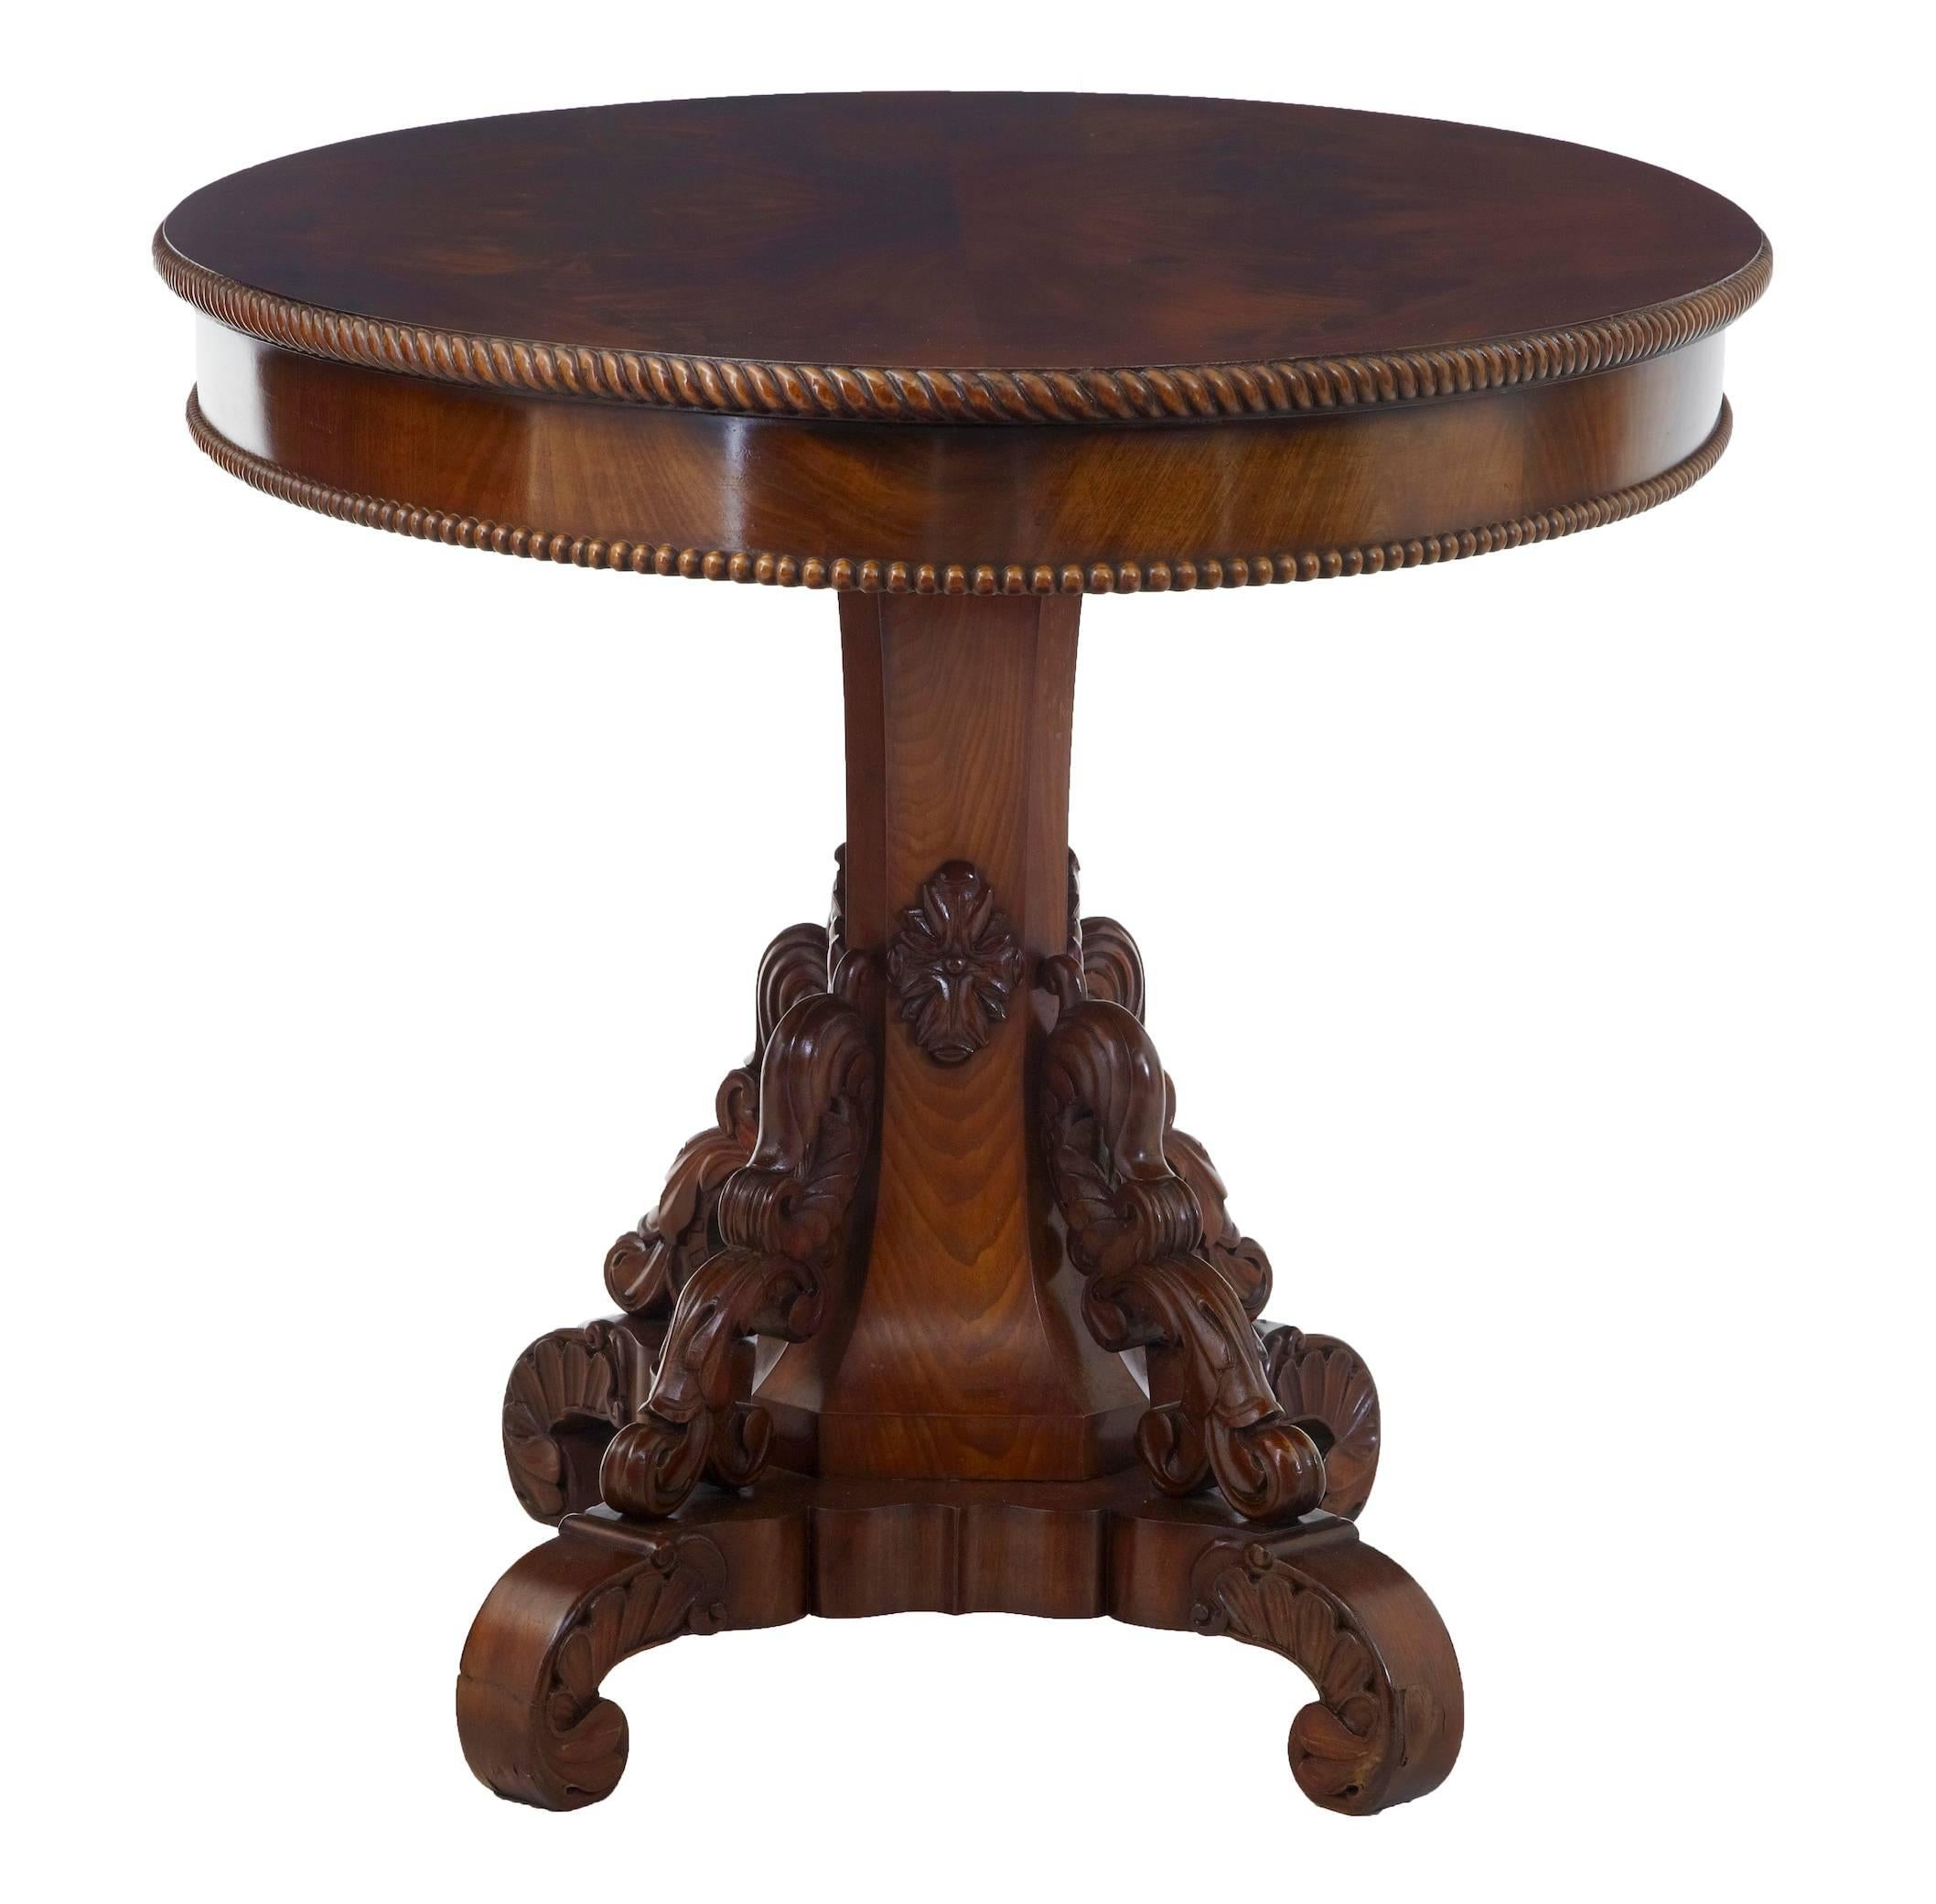 Stunning center table with flame mahogany top, circa 1880.
Oval top with gadrooned and beaded edging.
Beautifully carved foliage leading down the shaped base.
Good rich color.

Minor veneer crack (pictured)

Neasures: Height 29 1/2